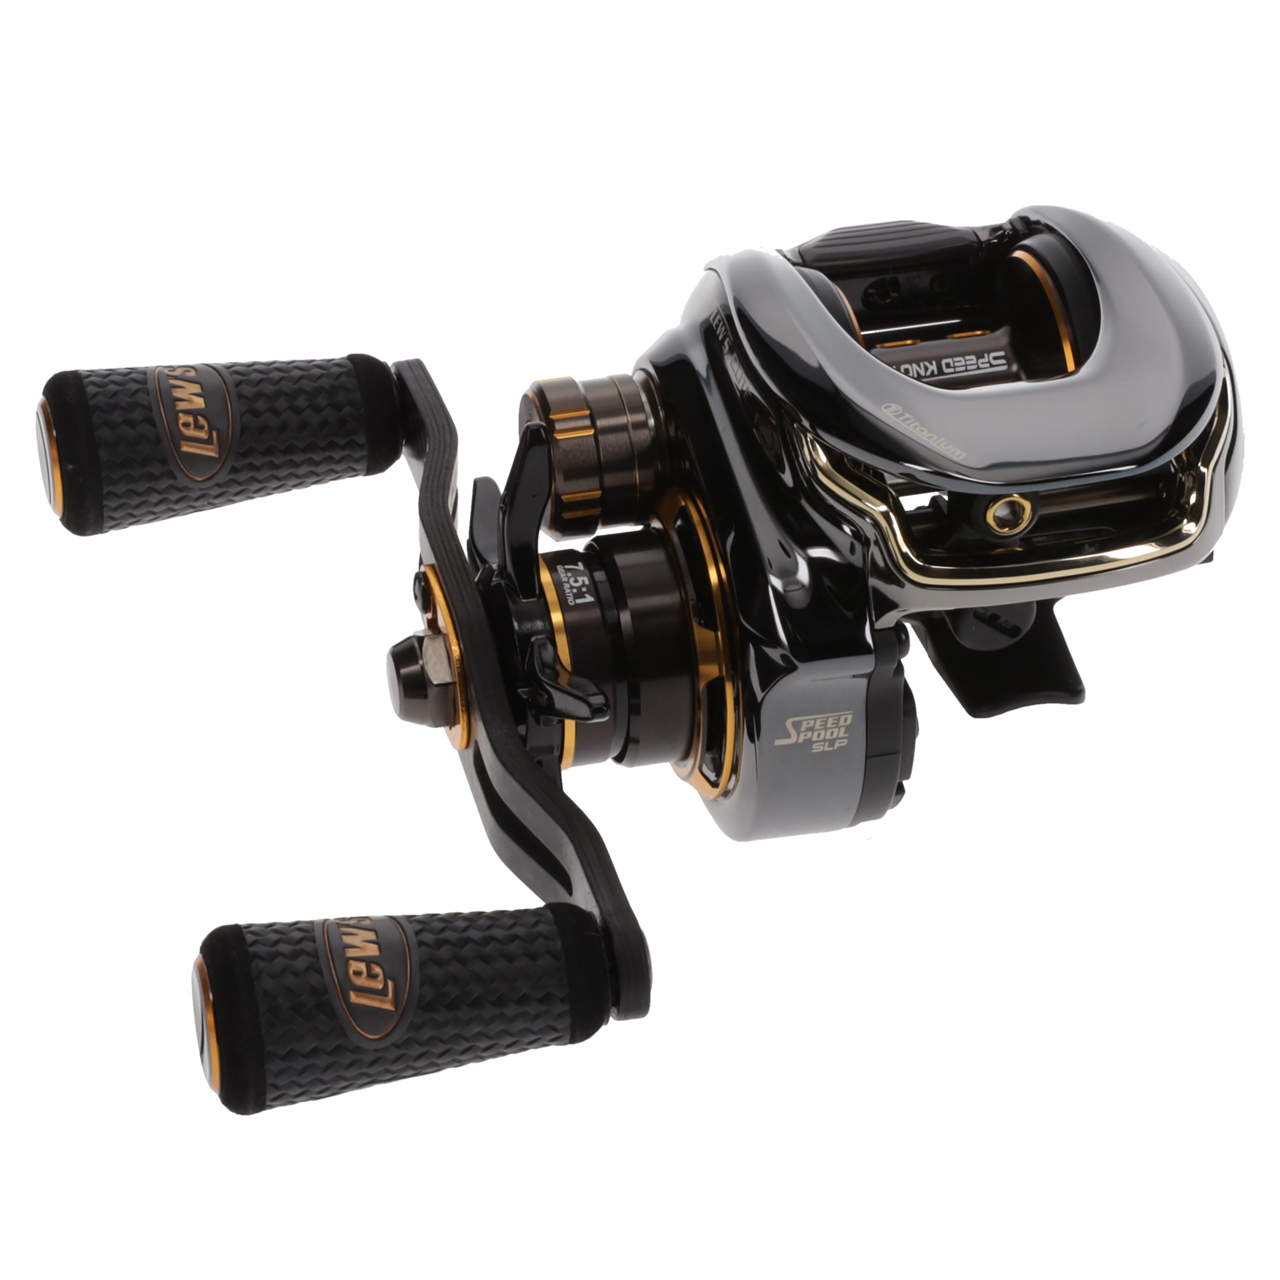 Lew's Pro SP Skipping and Pitching SLP Left hand Baitcasting Reel 